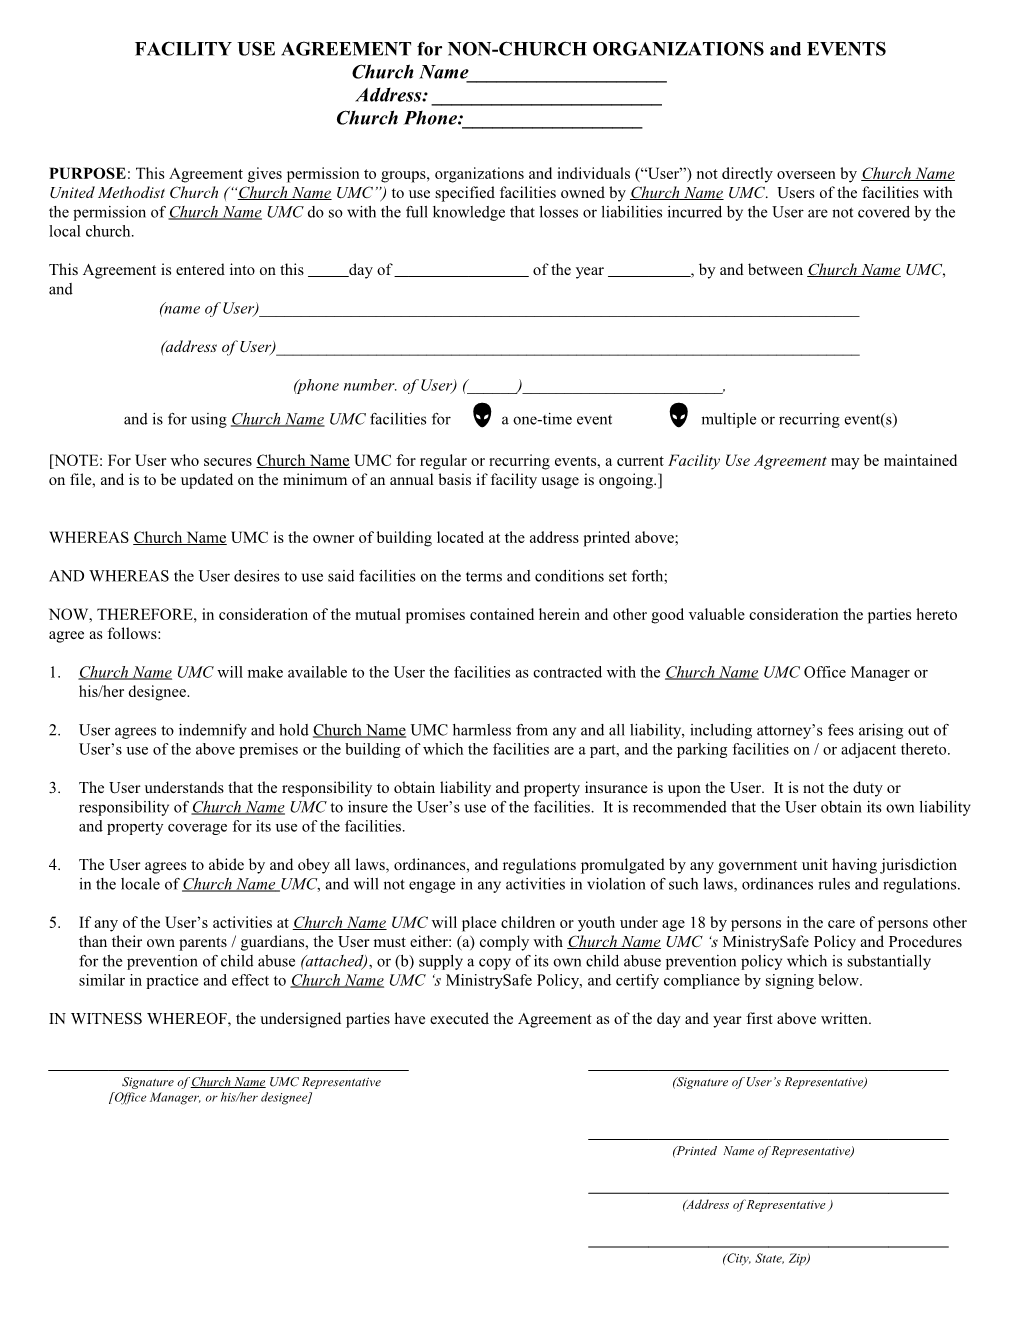 FACILITY USE AGREEMENT for NON-CHURCH ORGANIZATIONS and EVENTS